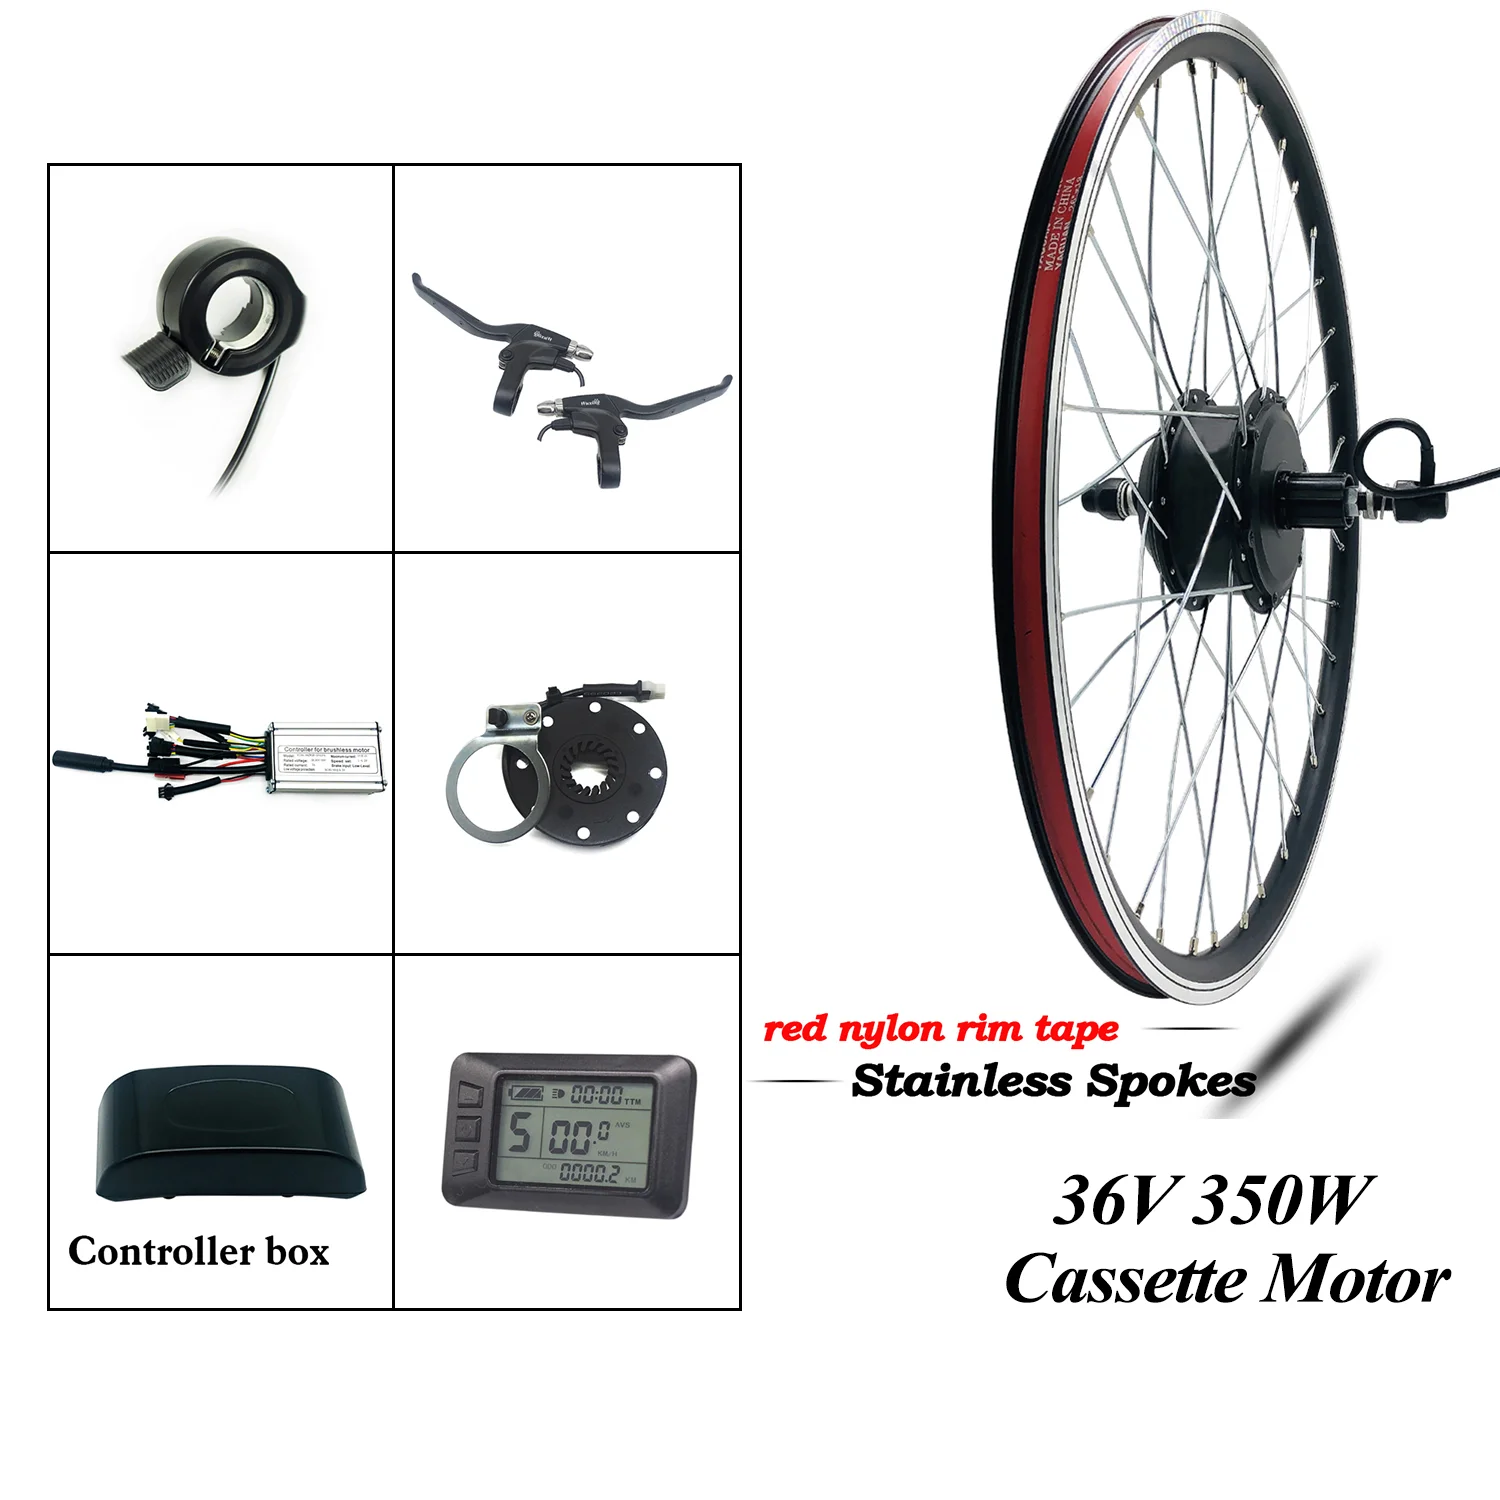 Greenpedel cheap 36V 350W 28 inch waterproof ebike electric bicycle scooter hub motor conversion kit